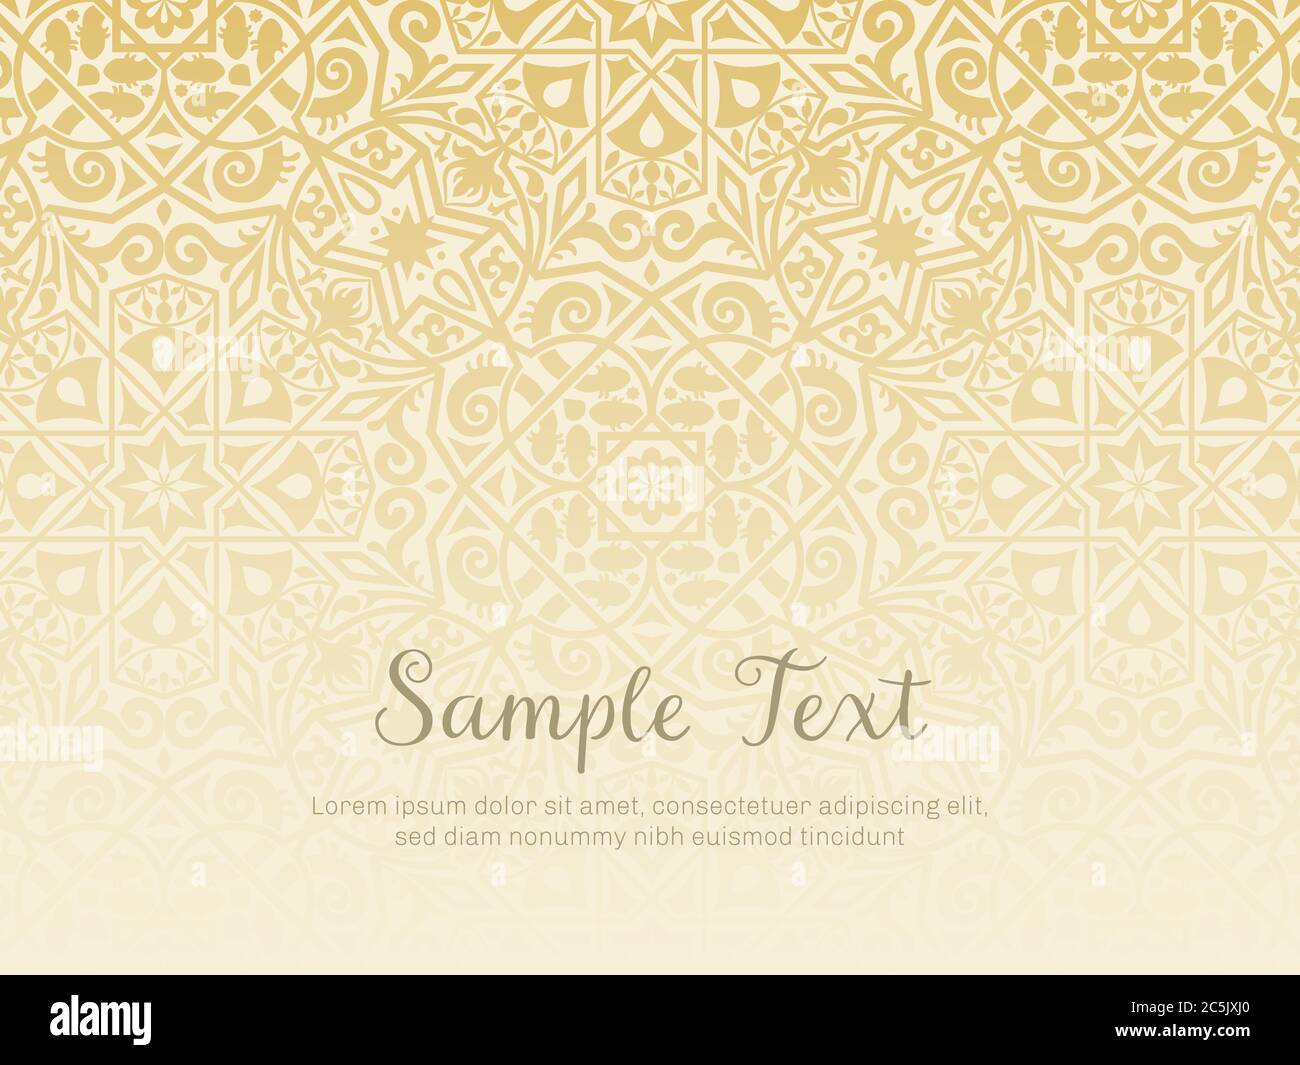 Background design in arabesque style. Gradual texture, perfect for backgrounds, wallpapers and invitation designs. Vector illustration. Stock Vector